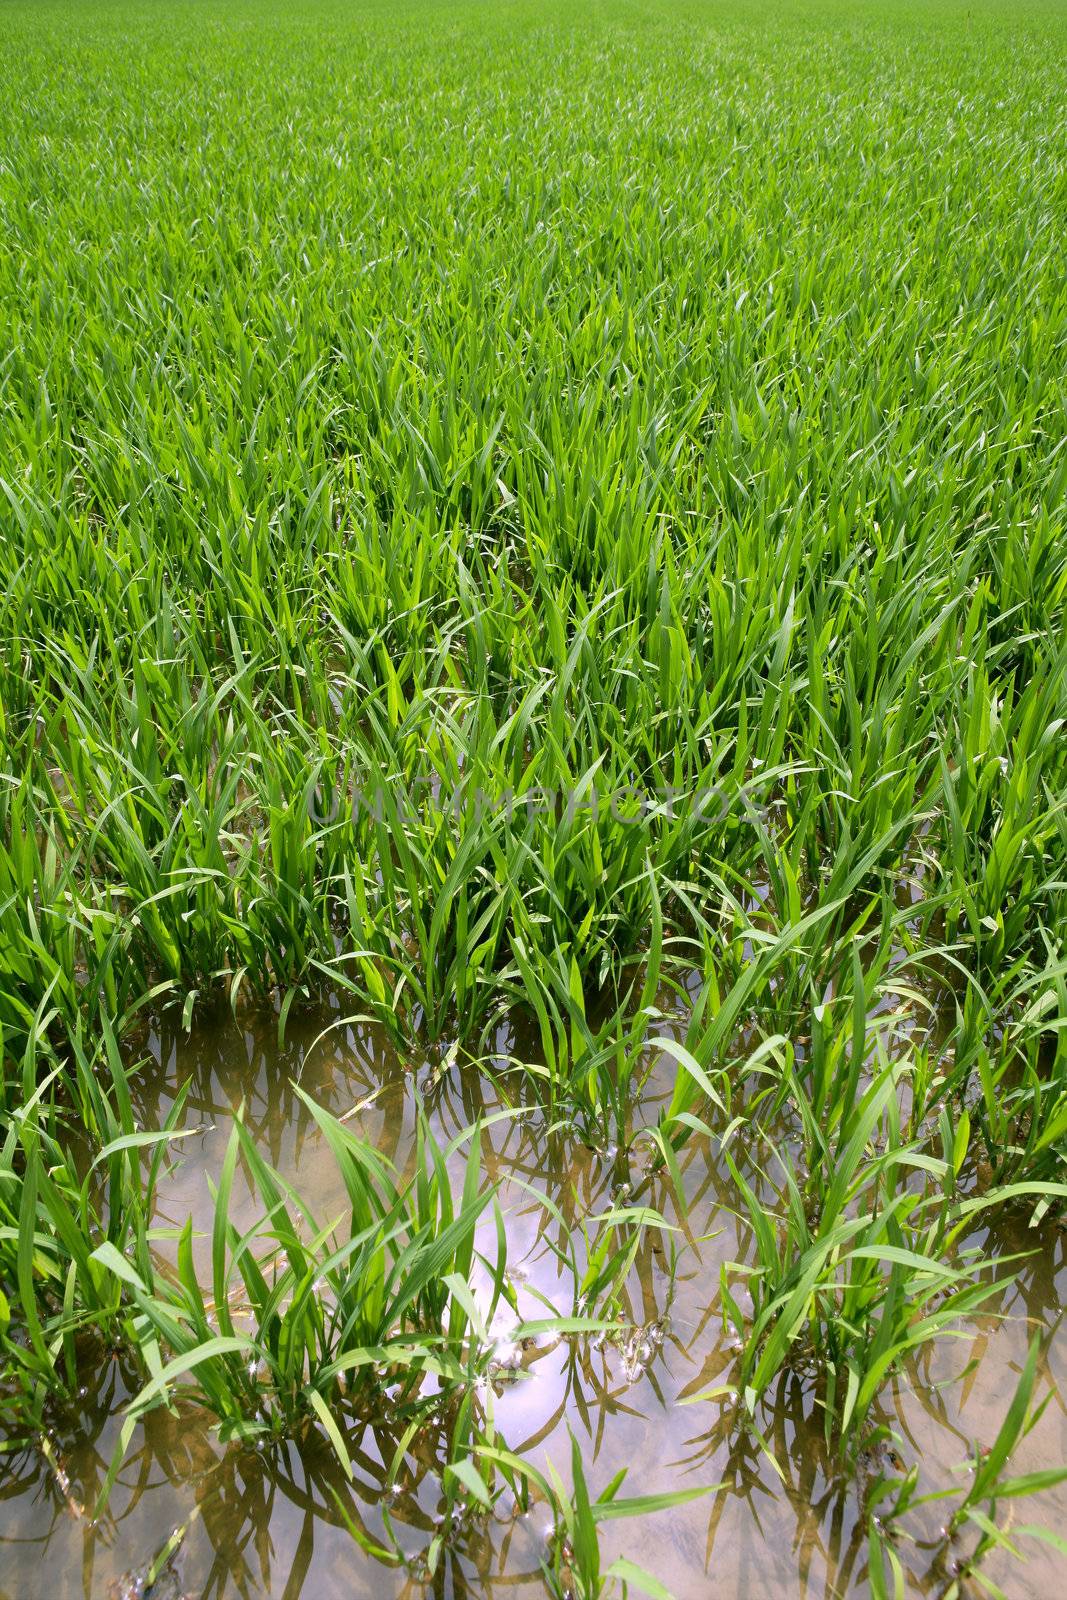 Green rice plants in irrigation water spring fields